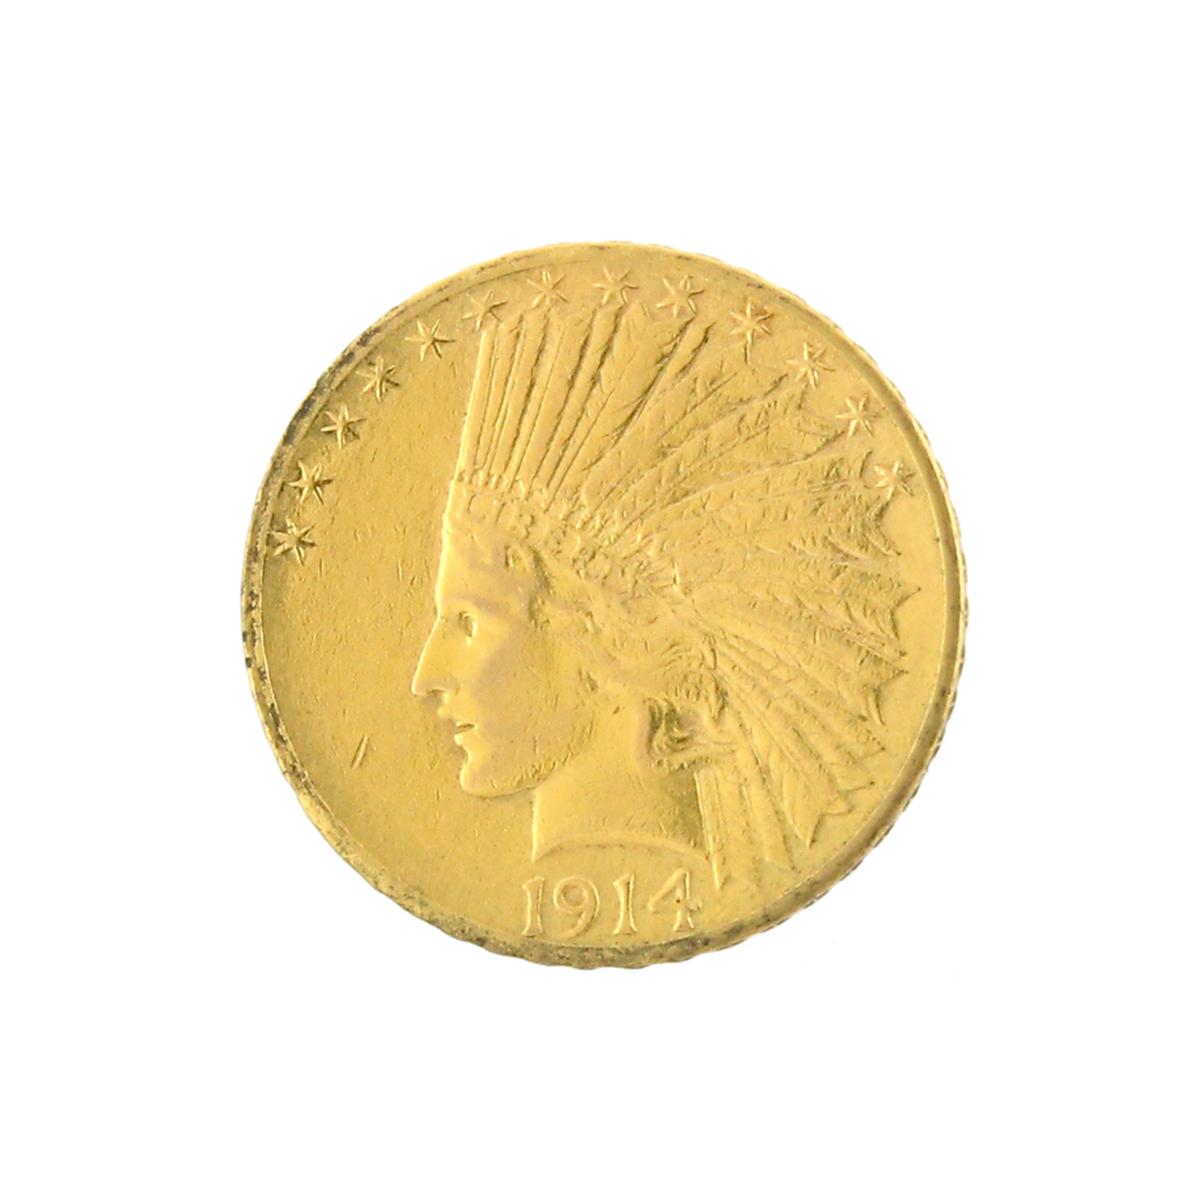 *Extremely Rare 1914-D $10 U.S. Indian Head Gold Coin (DF)